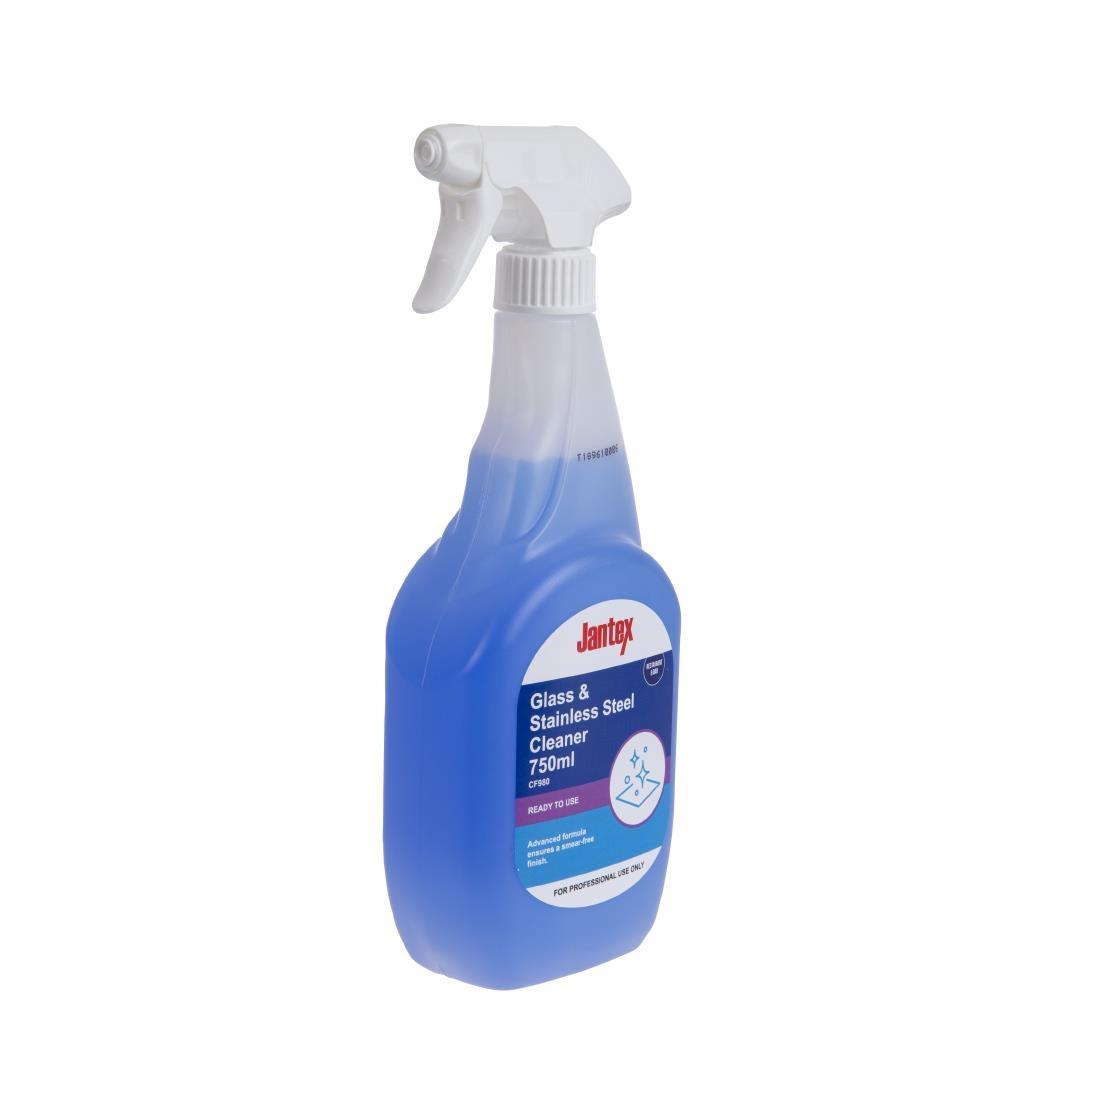 Jantex Glass and Stainless Steel Cleaner Ready To Use 750ml - CF980  - 2